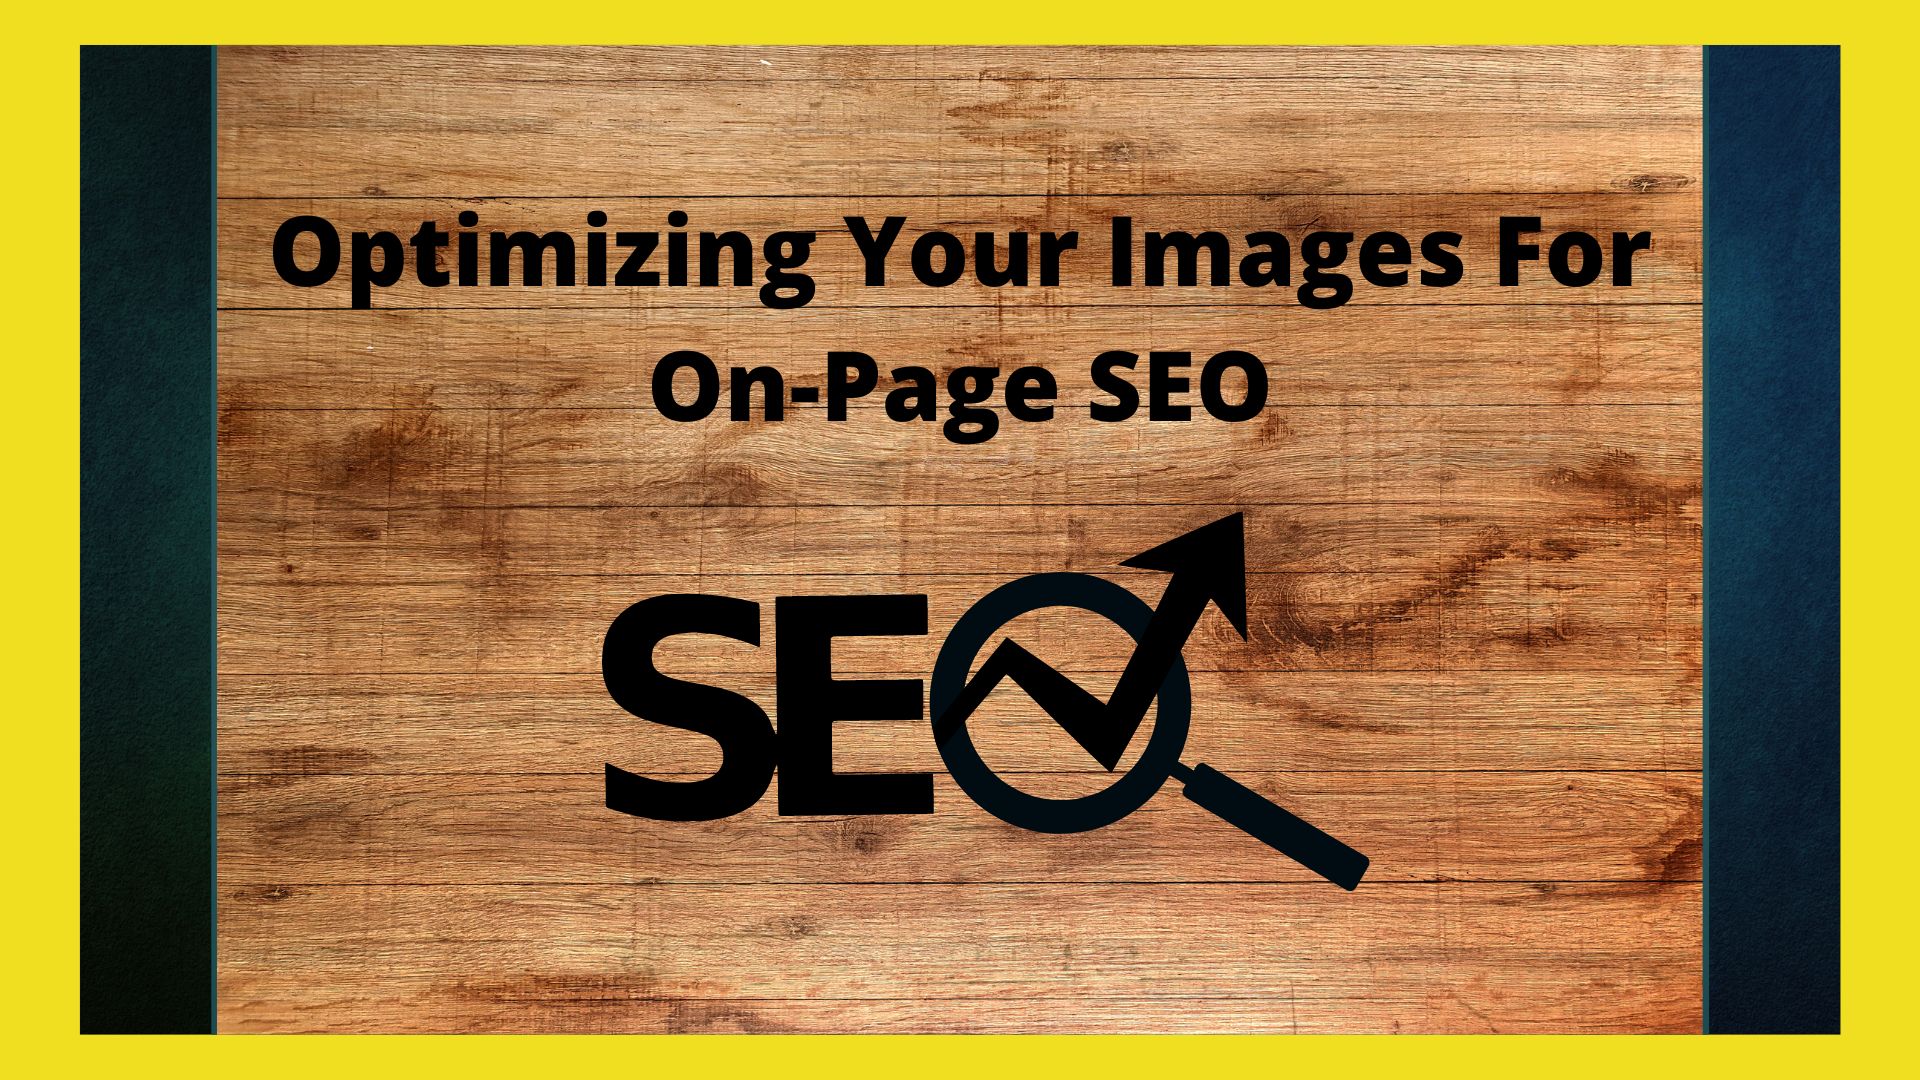 Optimizing Your Images for On-Page SEO